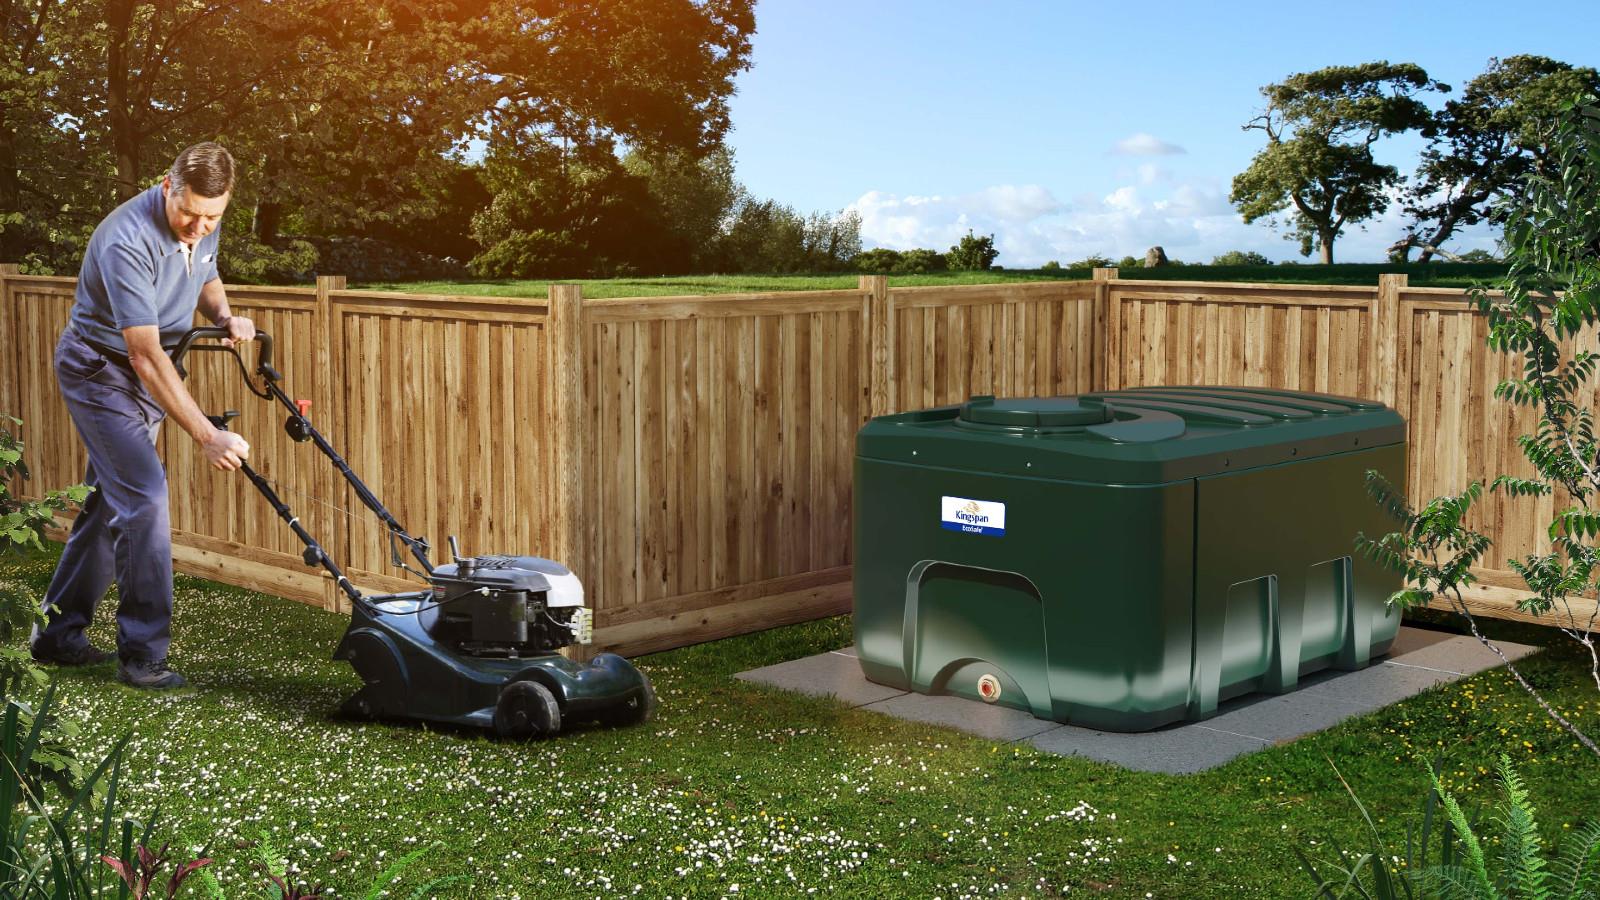 New Kingspan Titan Low-Profile Domestic Oil Tank; Specially Designed for Small Spaces! image